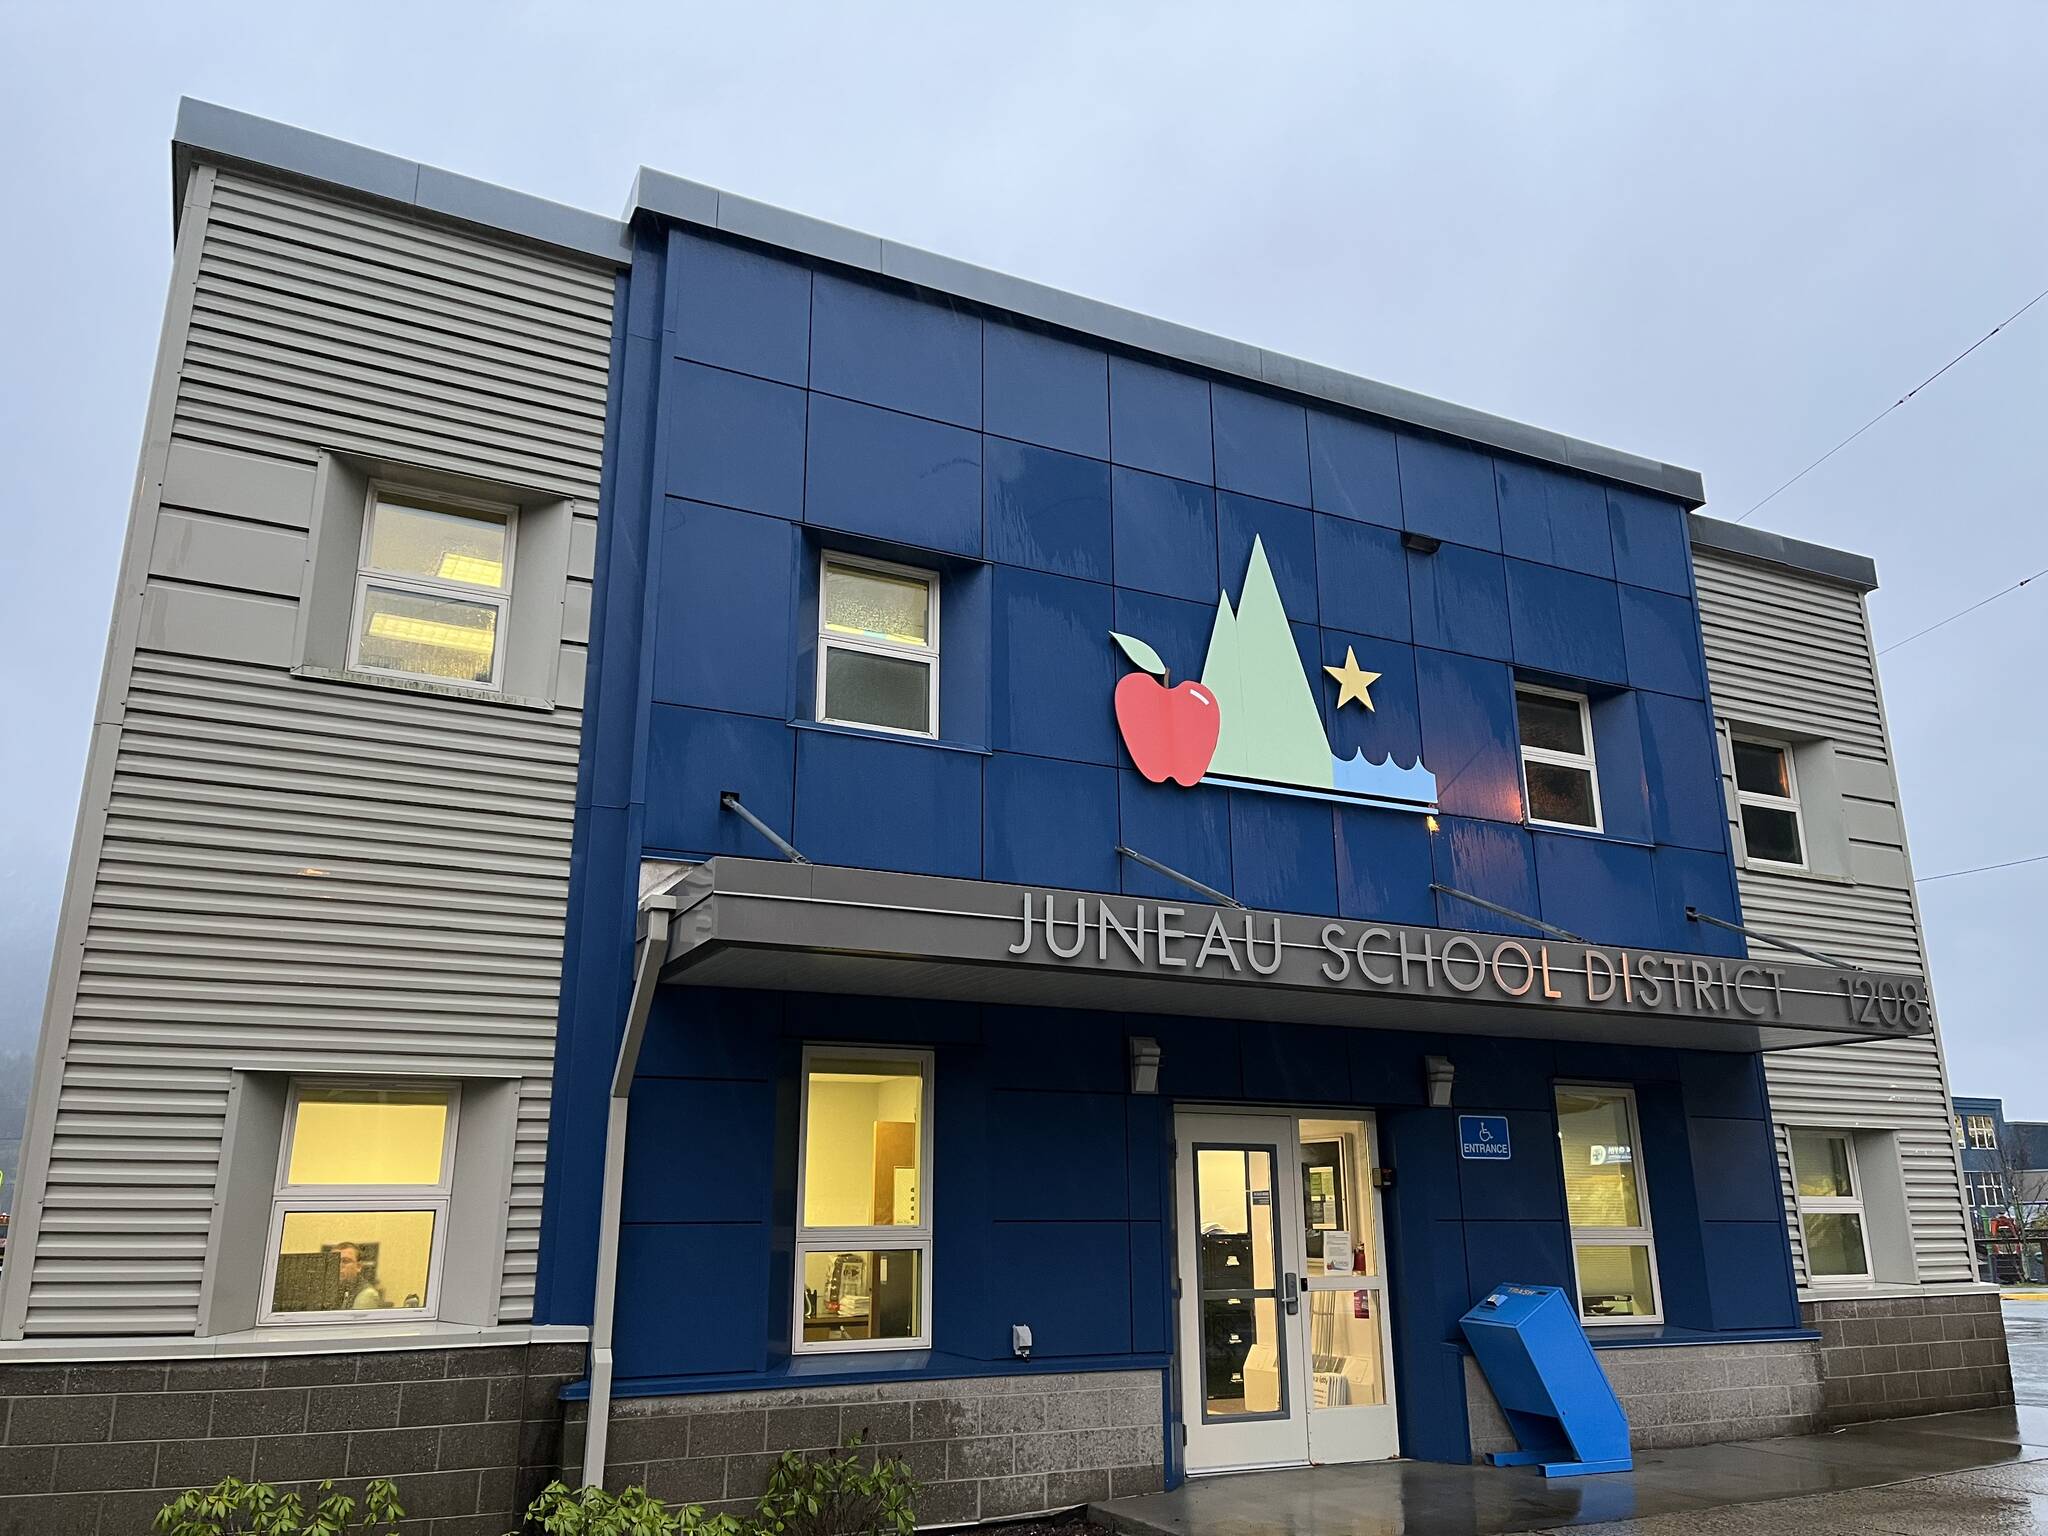 An independent third-party audit found Juneau School District spent at a deficit of over $620,000 and will need to figure out a way to replenish the fund deficit and balance its budget before the next budgeting cycle starting June 30, 2023. (Jonson Kuhn / Juneau Empire File)